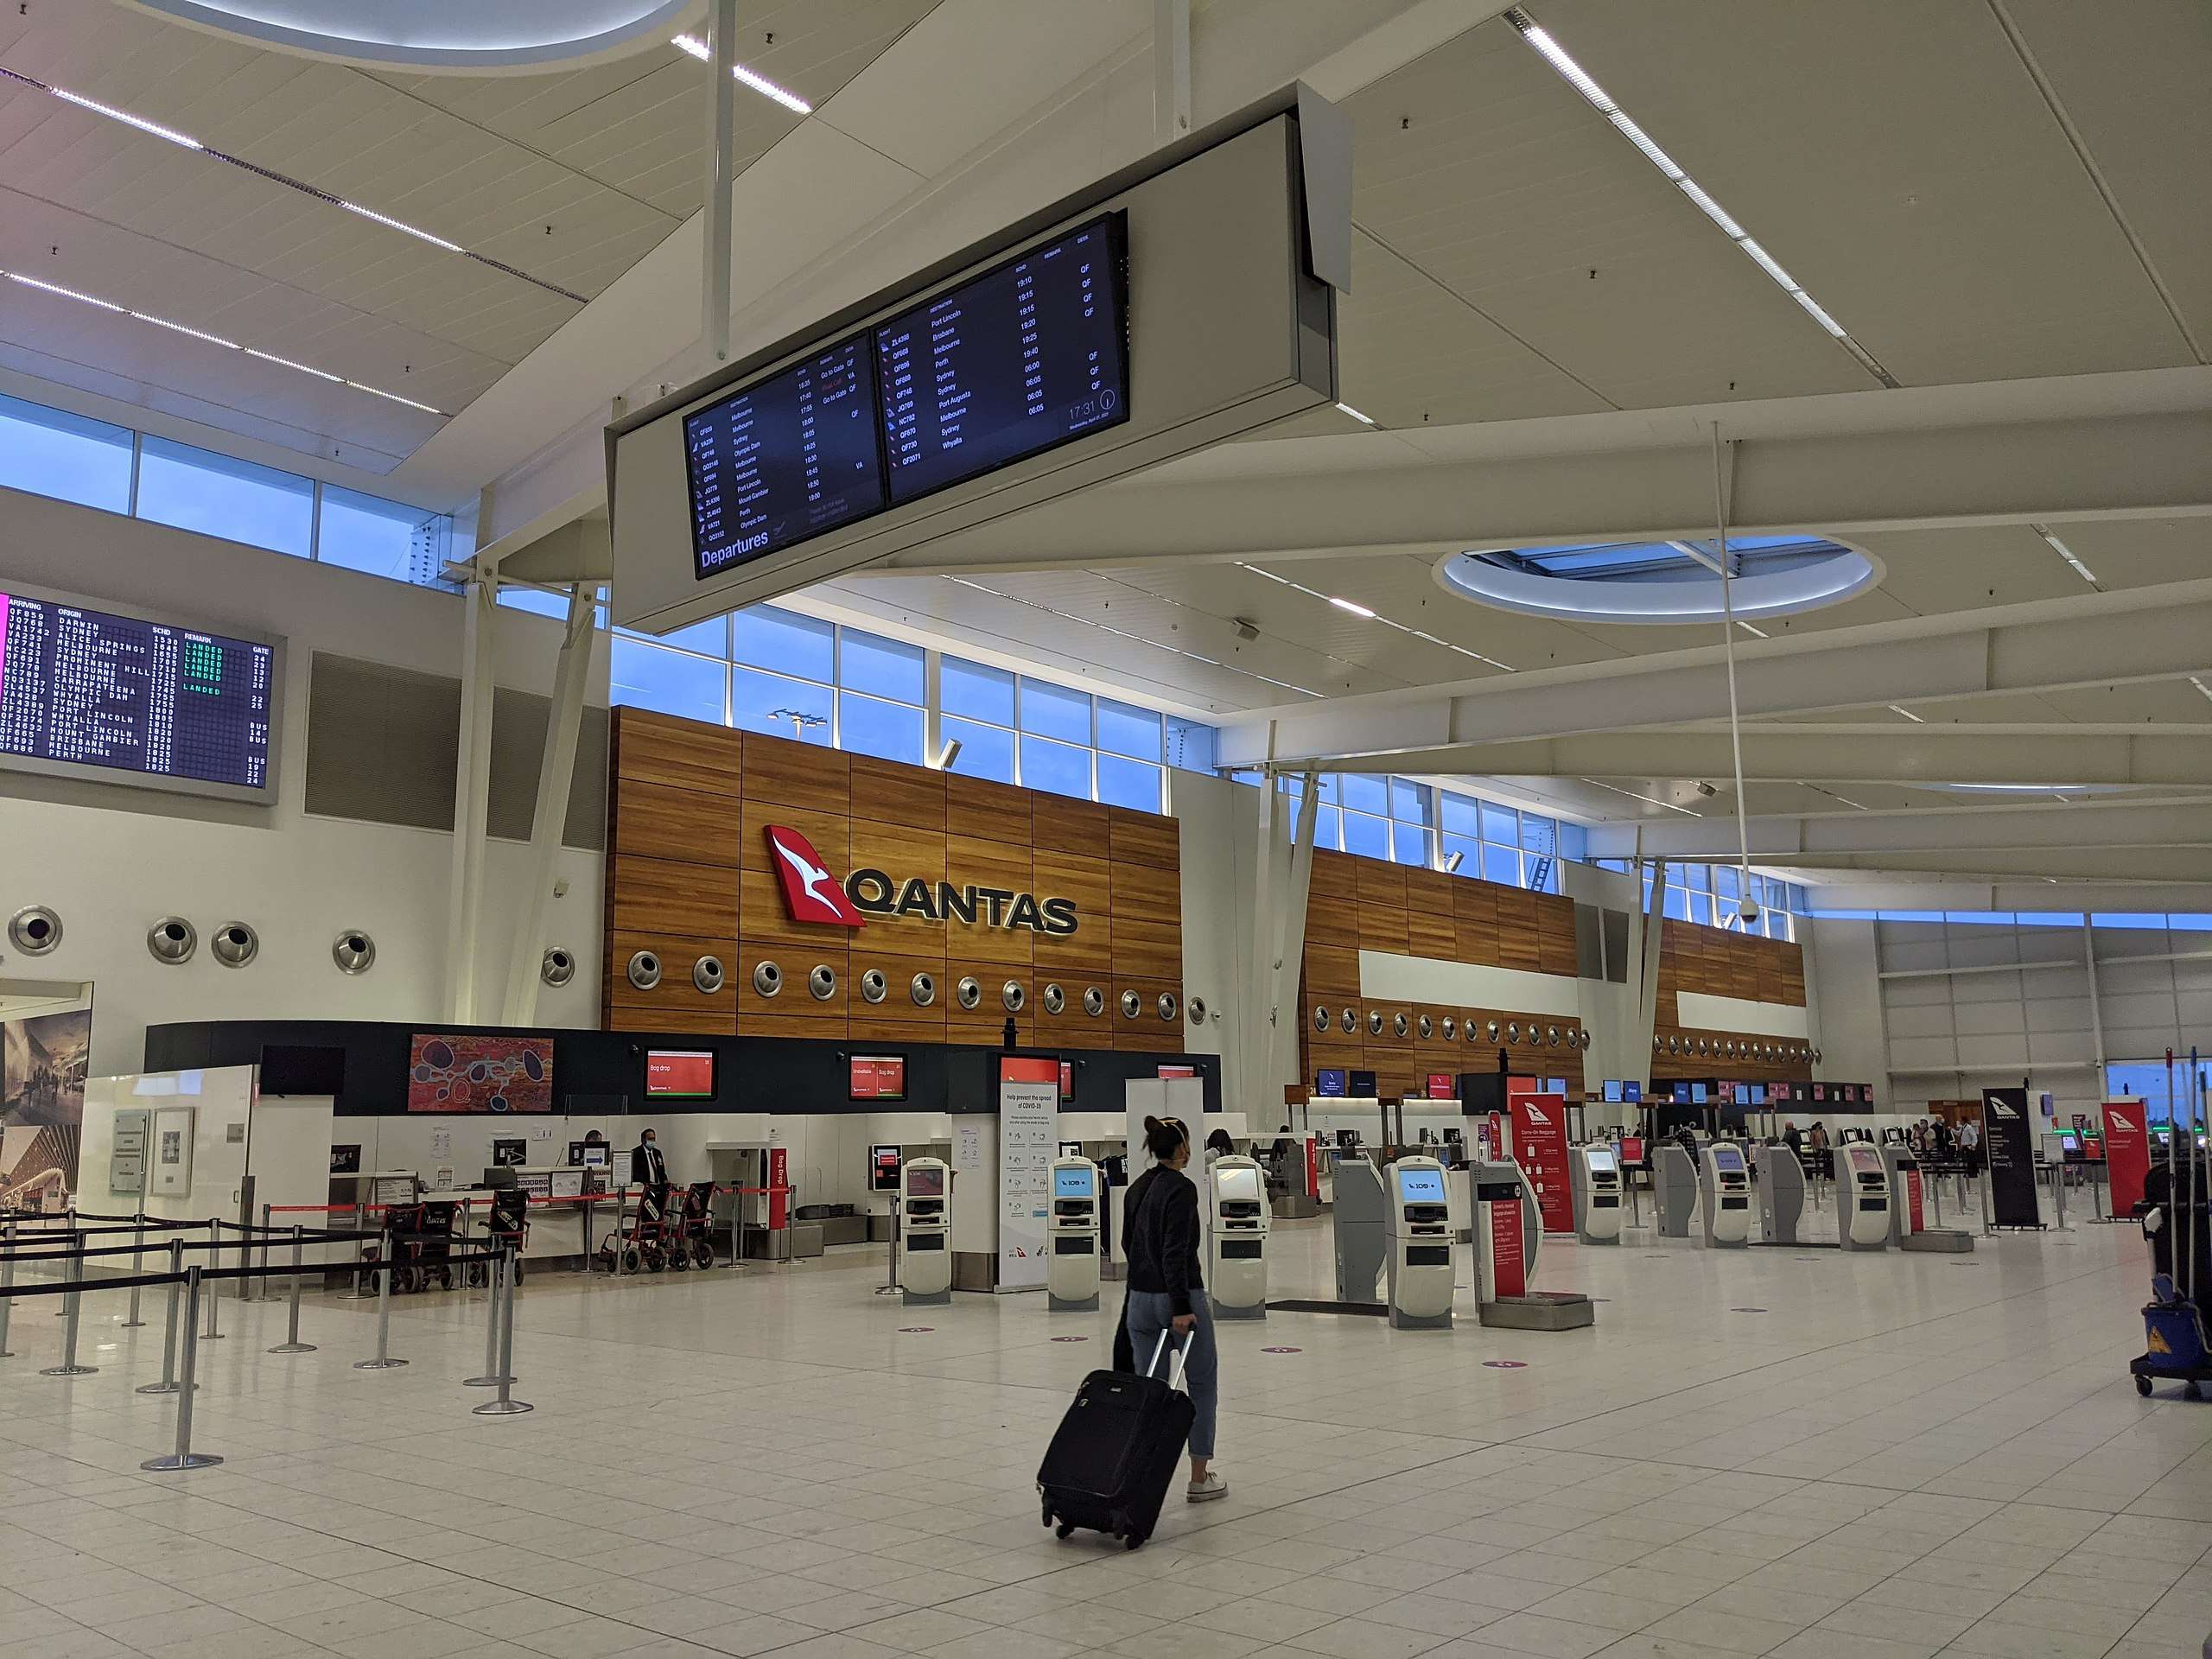 Adelaide's Peak Holiday Period Begins at the Airport